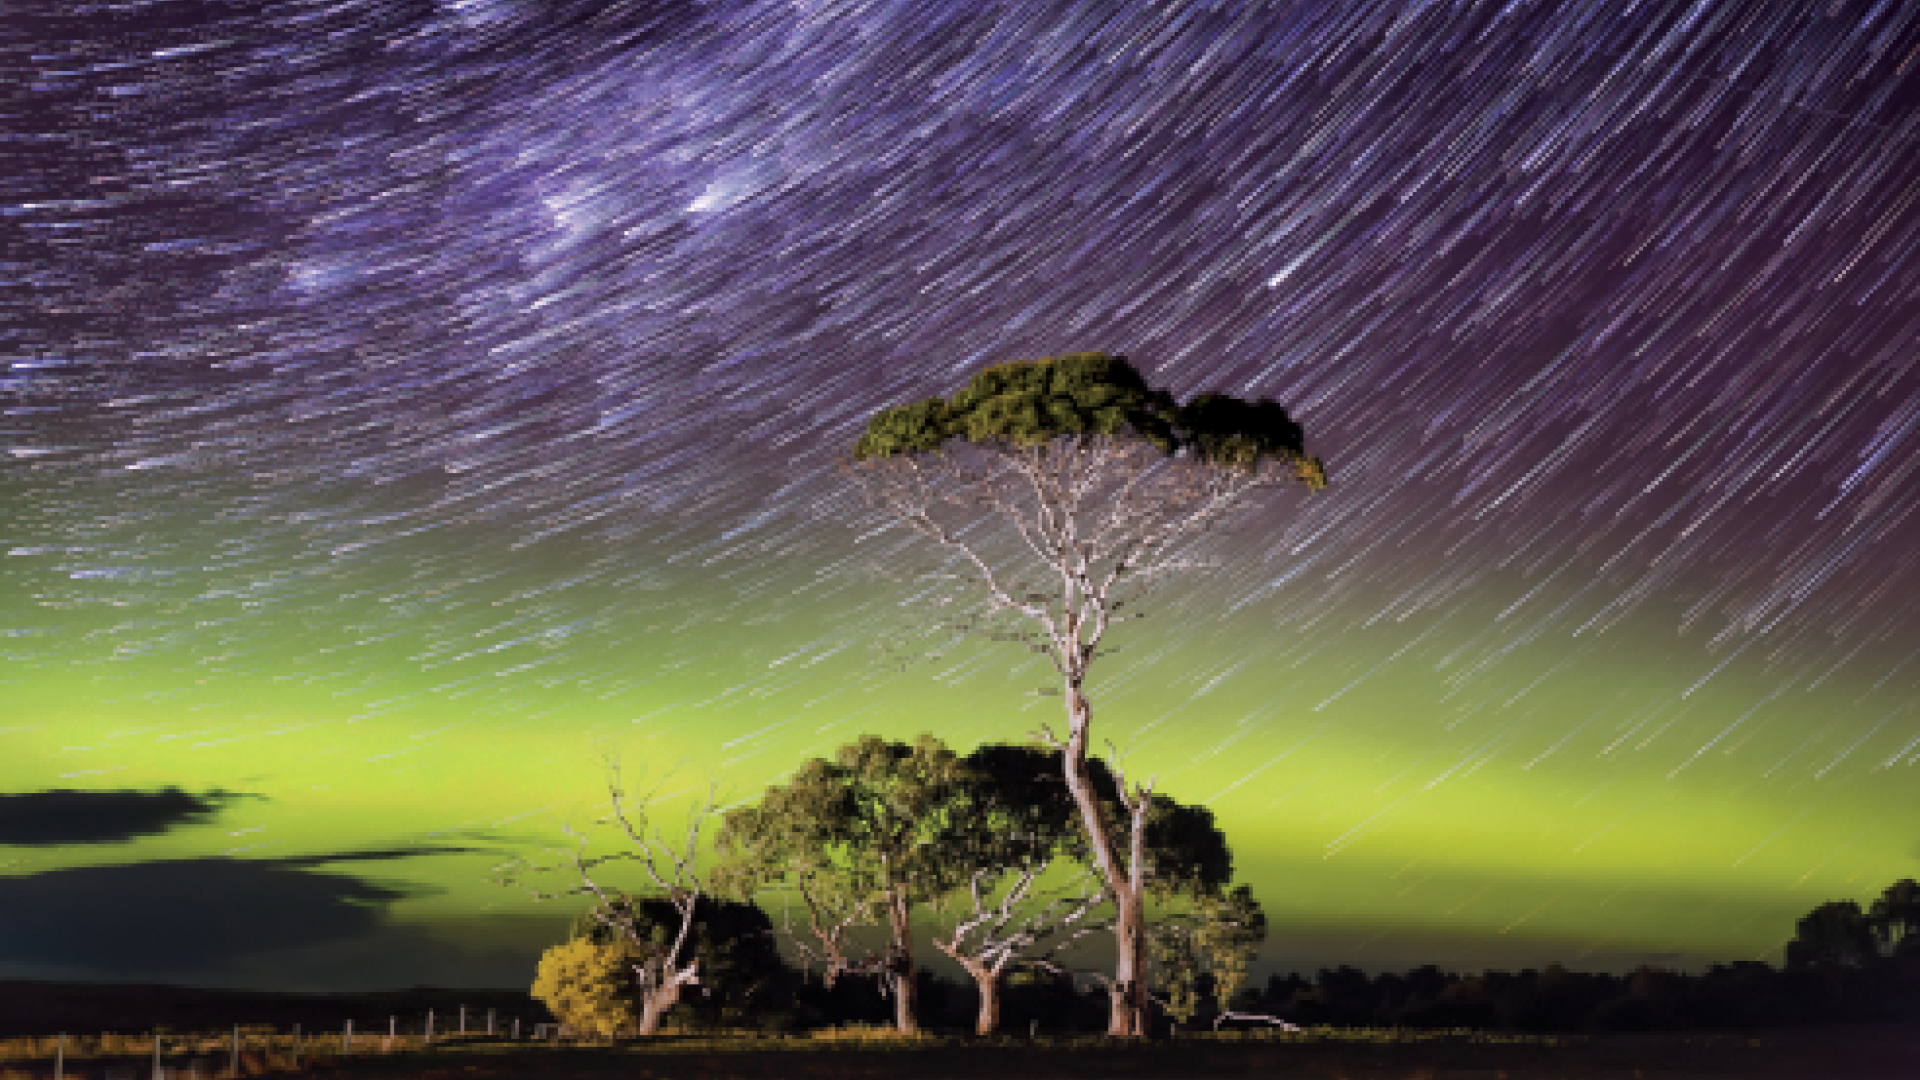 Star Trails over a bright green arc of aurora with an illuminated tree in the foreground Comet style star trail image with a bright green band of the Aurora Australis or Southern Lights arcing across the image with some illuminated trees in the foreground.